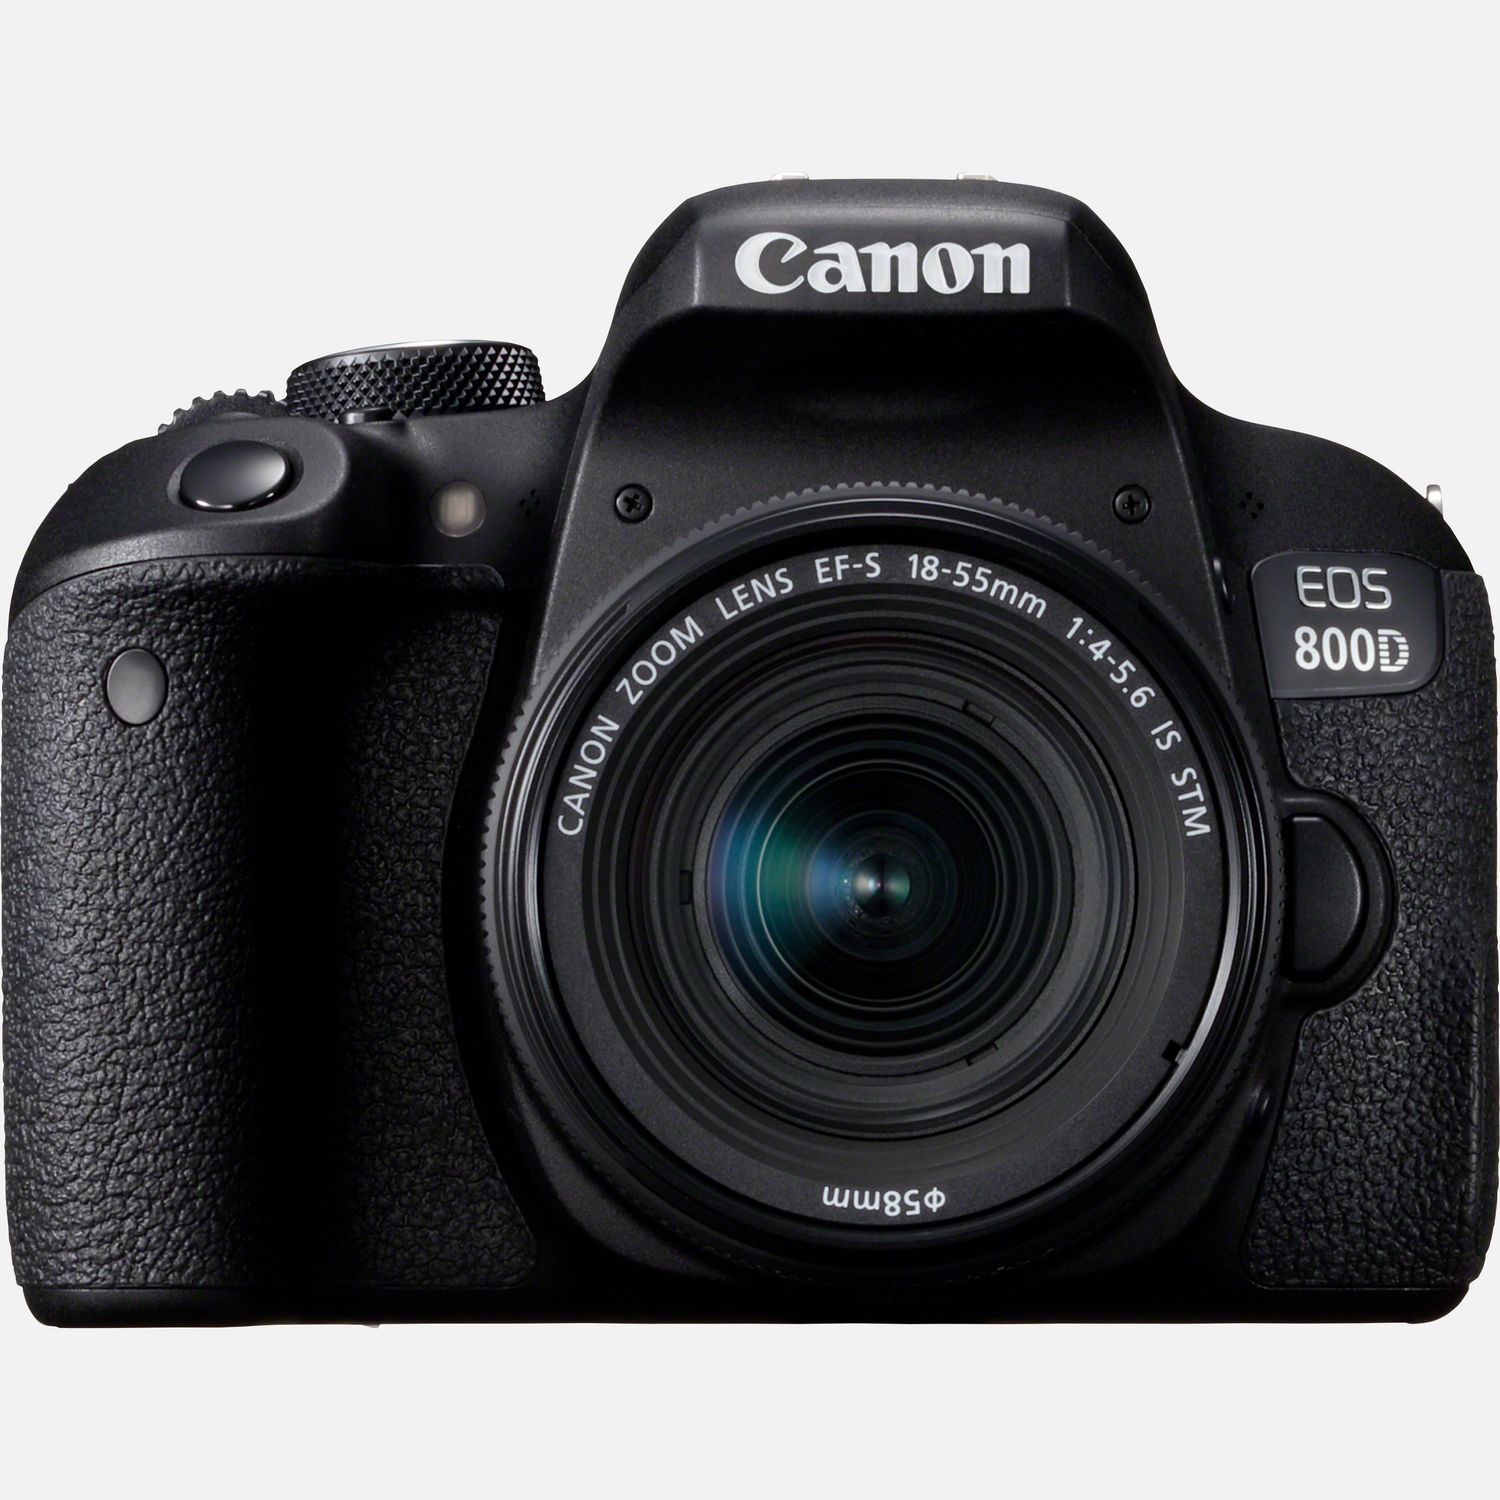 Image of Canon EOS 800D + EF-S 18-55mm f/4-5.6 IS STM